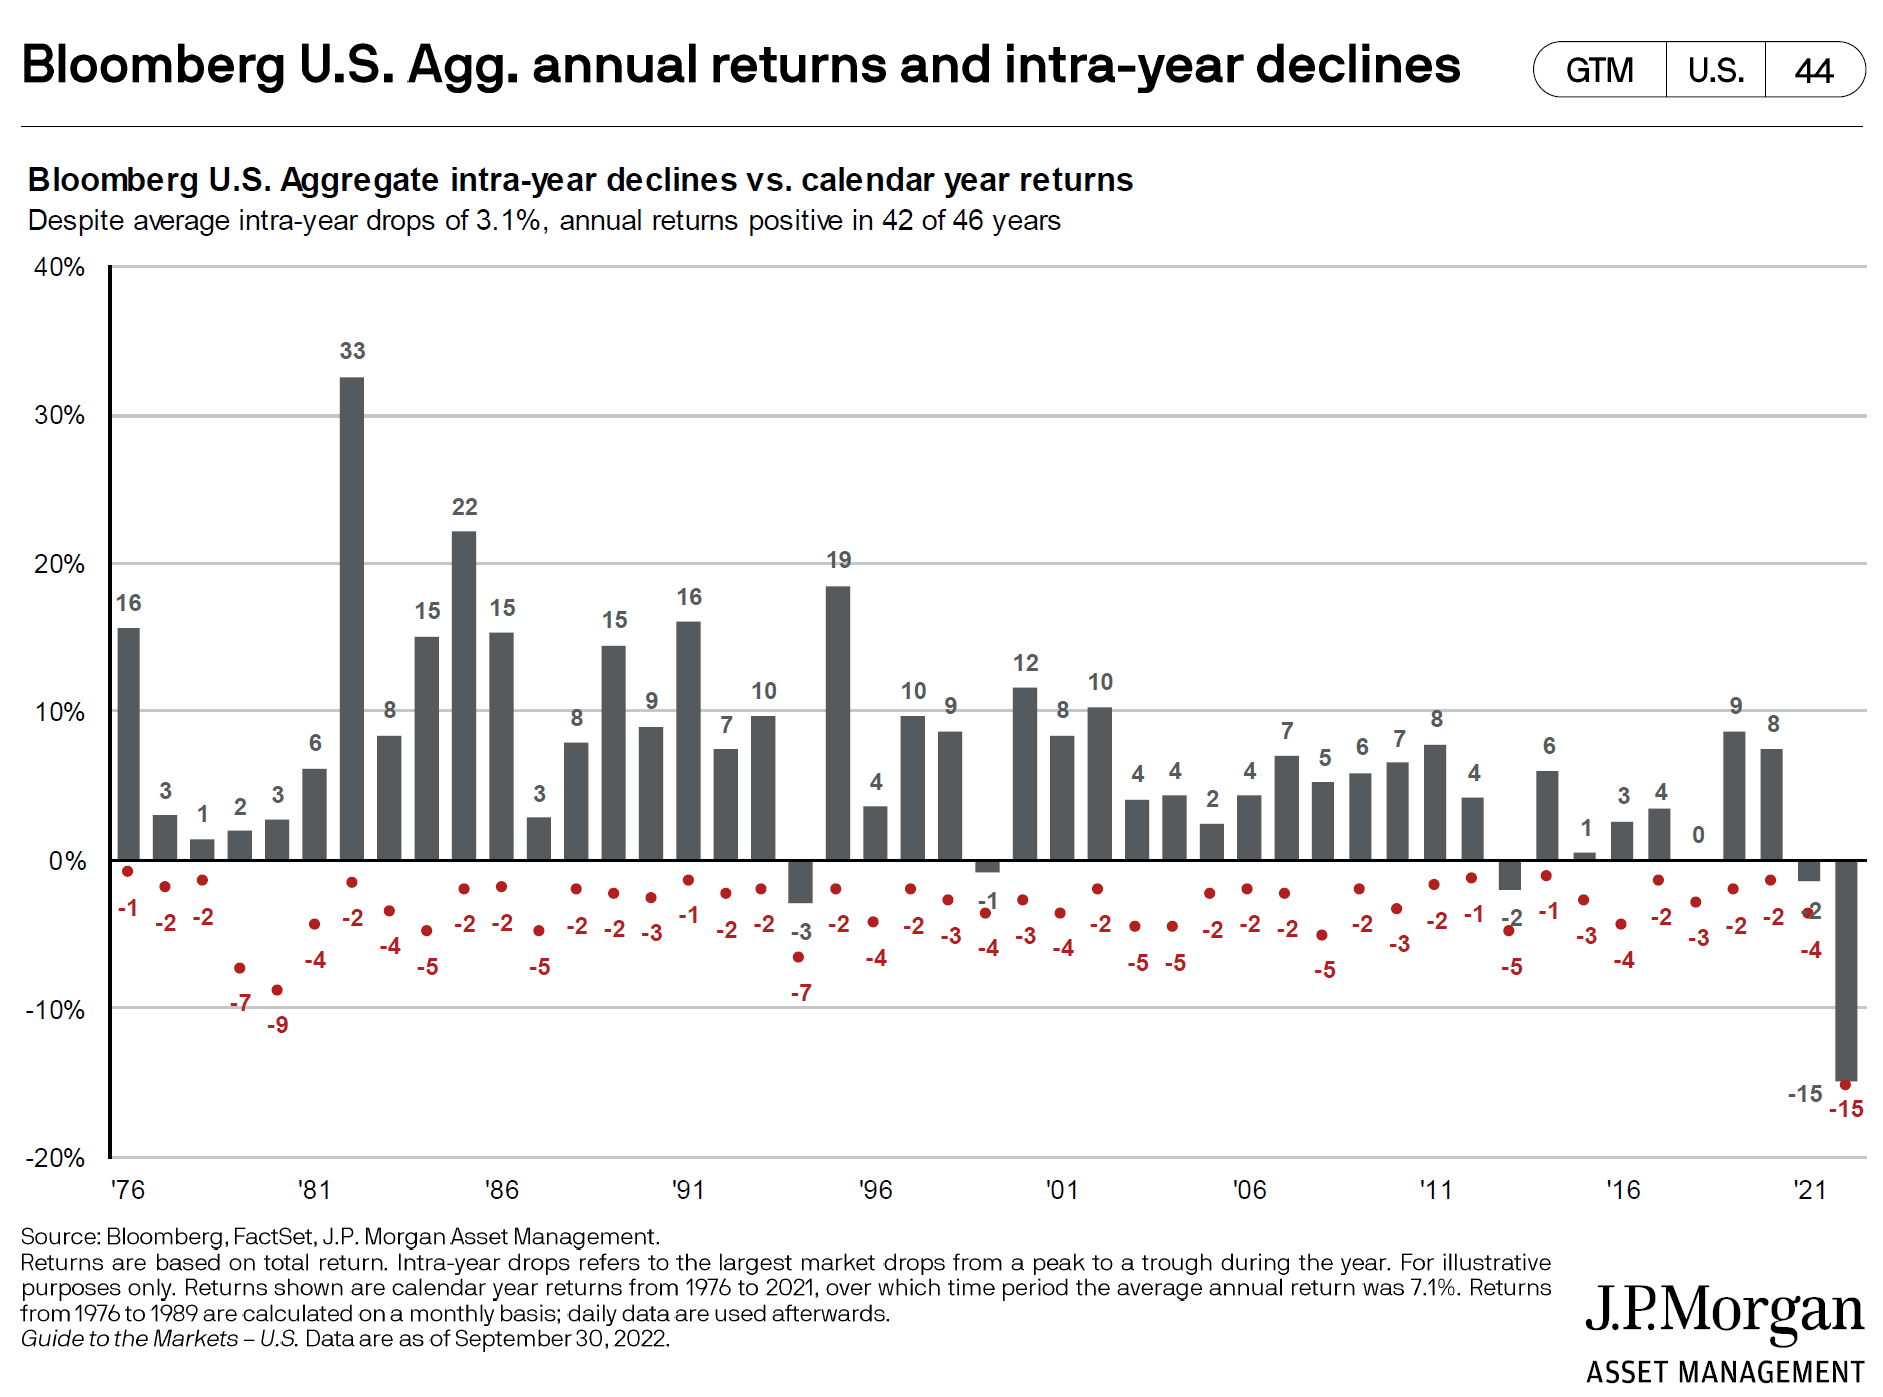 Bloomberg U.S. Agg. annual returns and intra-year declines